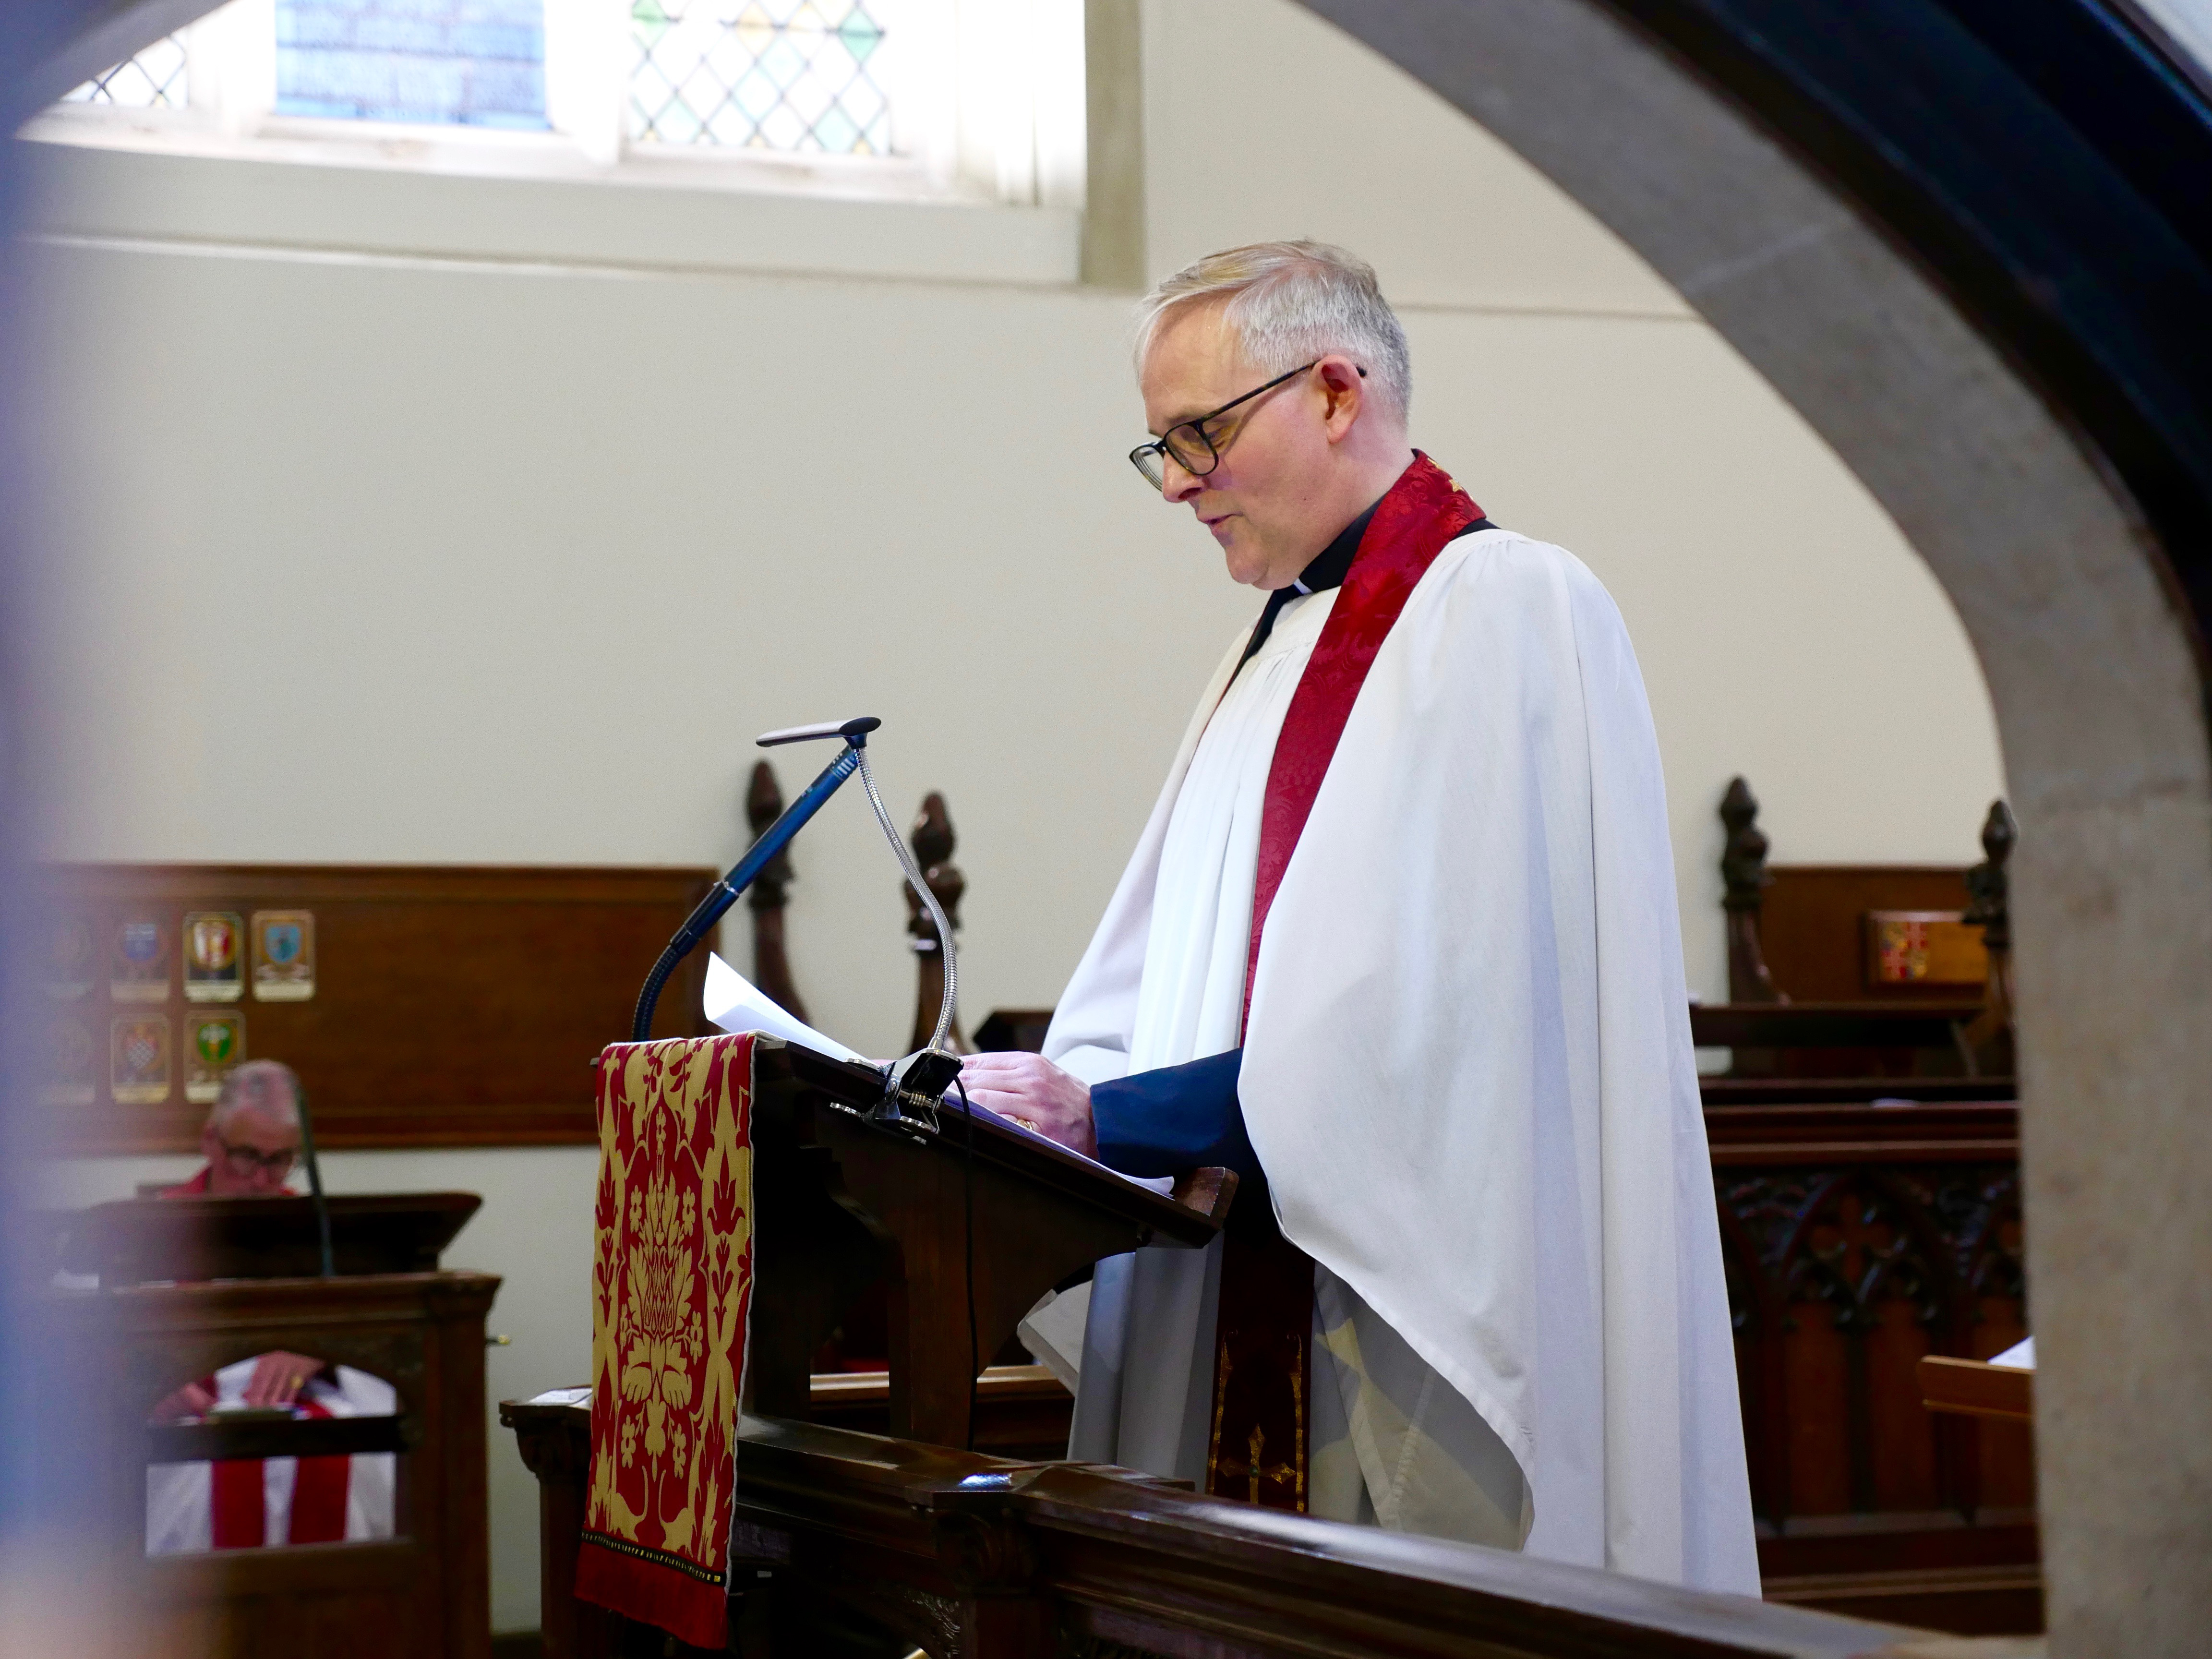 A clergy member reads at the Chapel of Savoy.